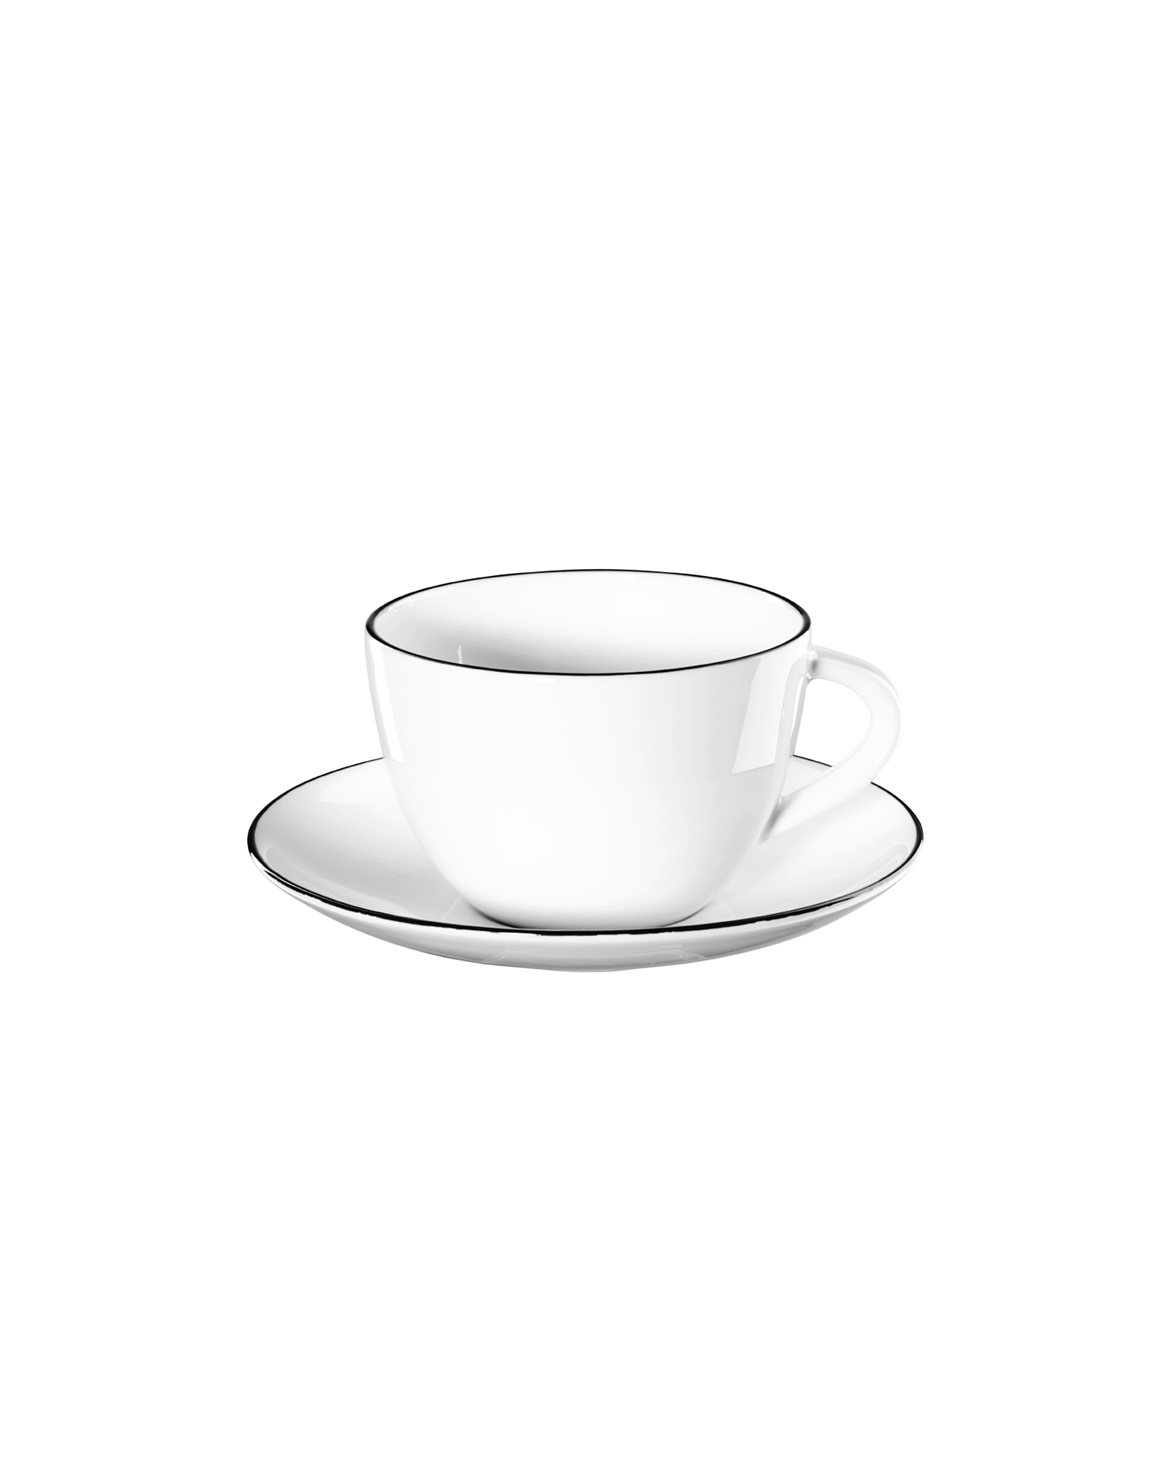 Asa Selection Round Cup With Saucer Black Trim